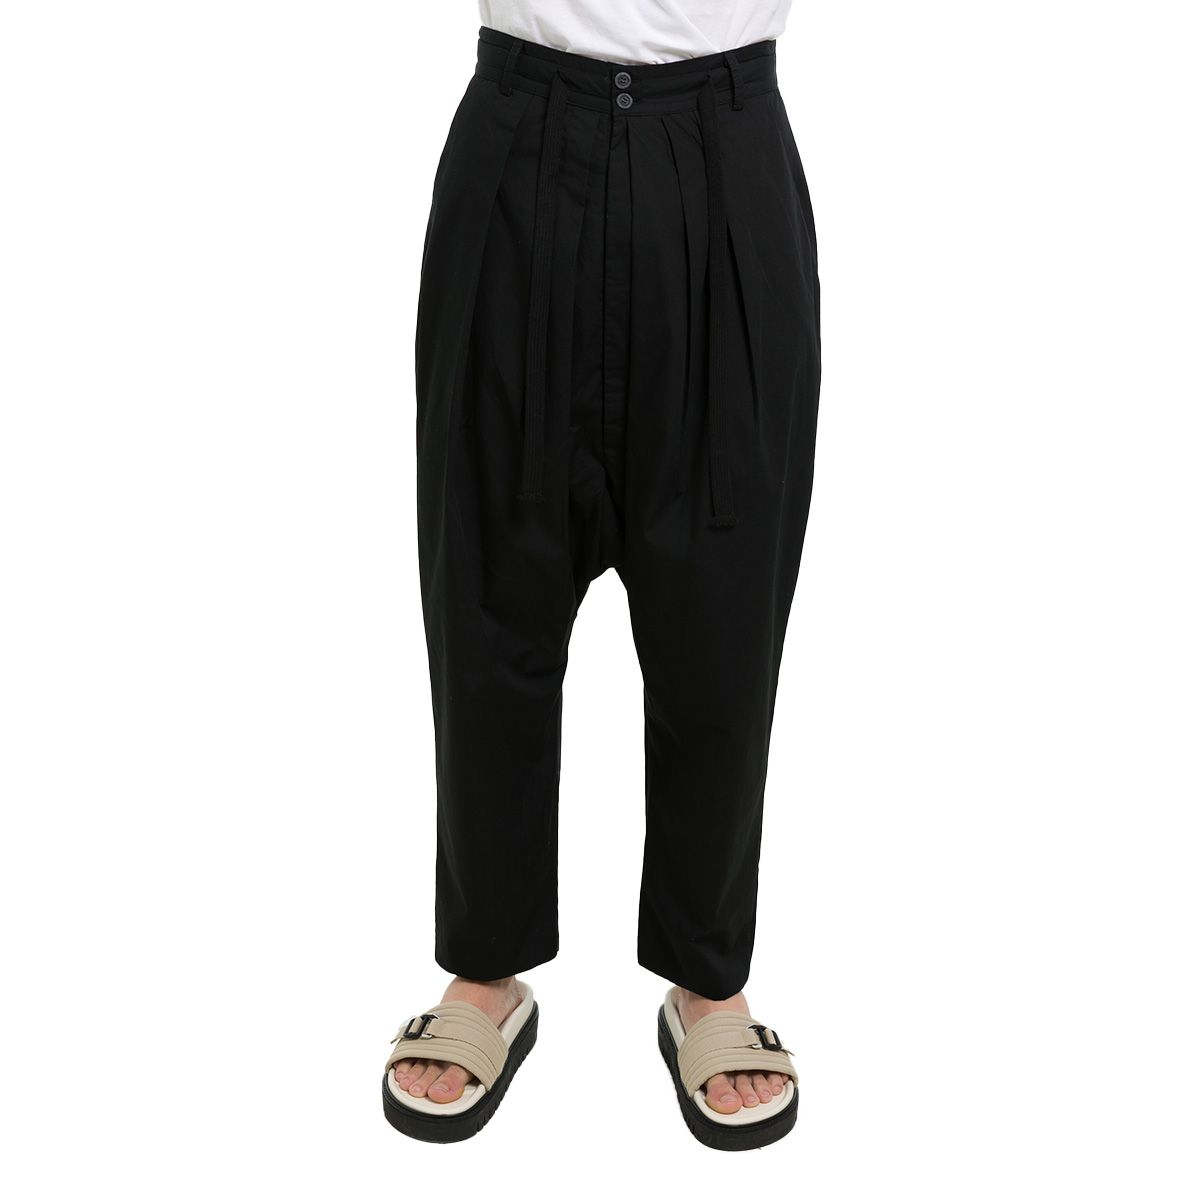 Black Loose Pockets Trousers